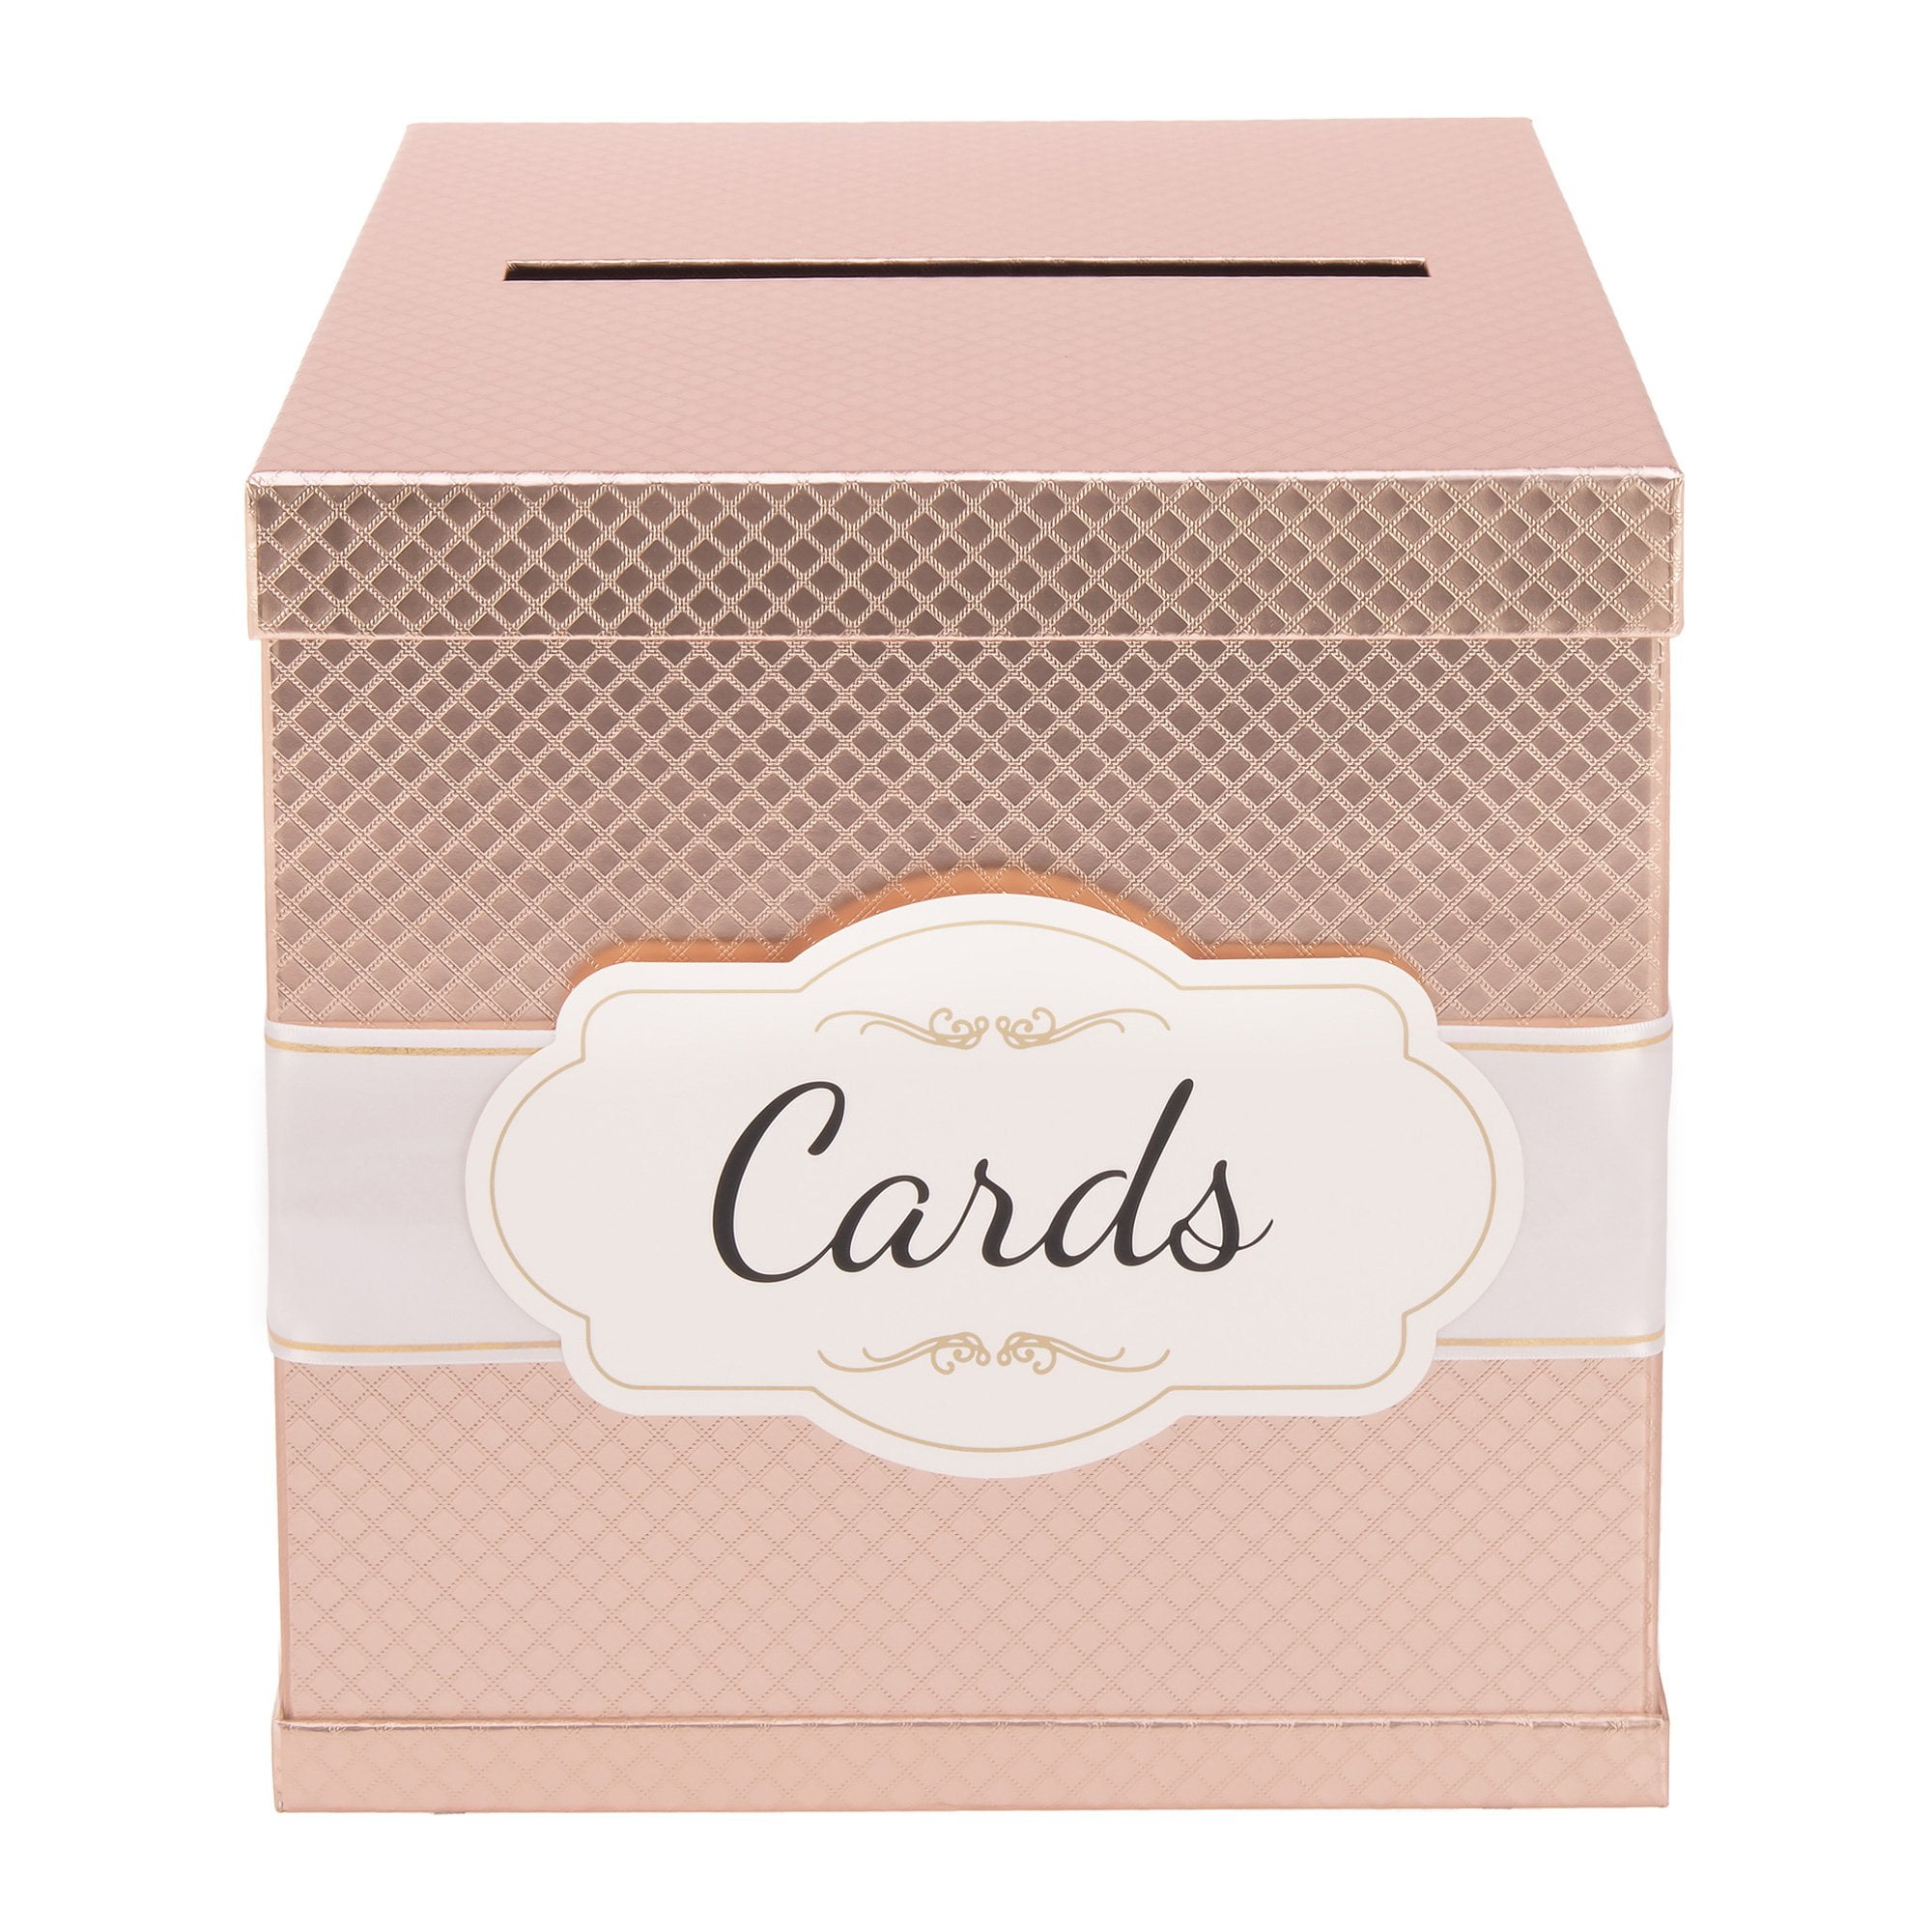 Merry Expressions Rose Gold Card Box - Gold-Foil Satin Ribbon & Cards Label - 10x10 Large Premium Finish, Perfect in Wedding Receptions